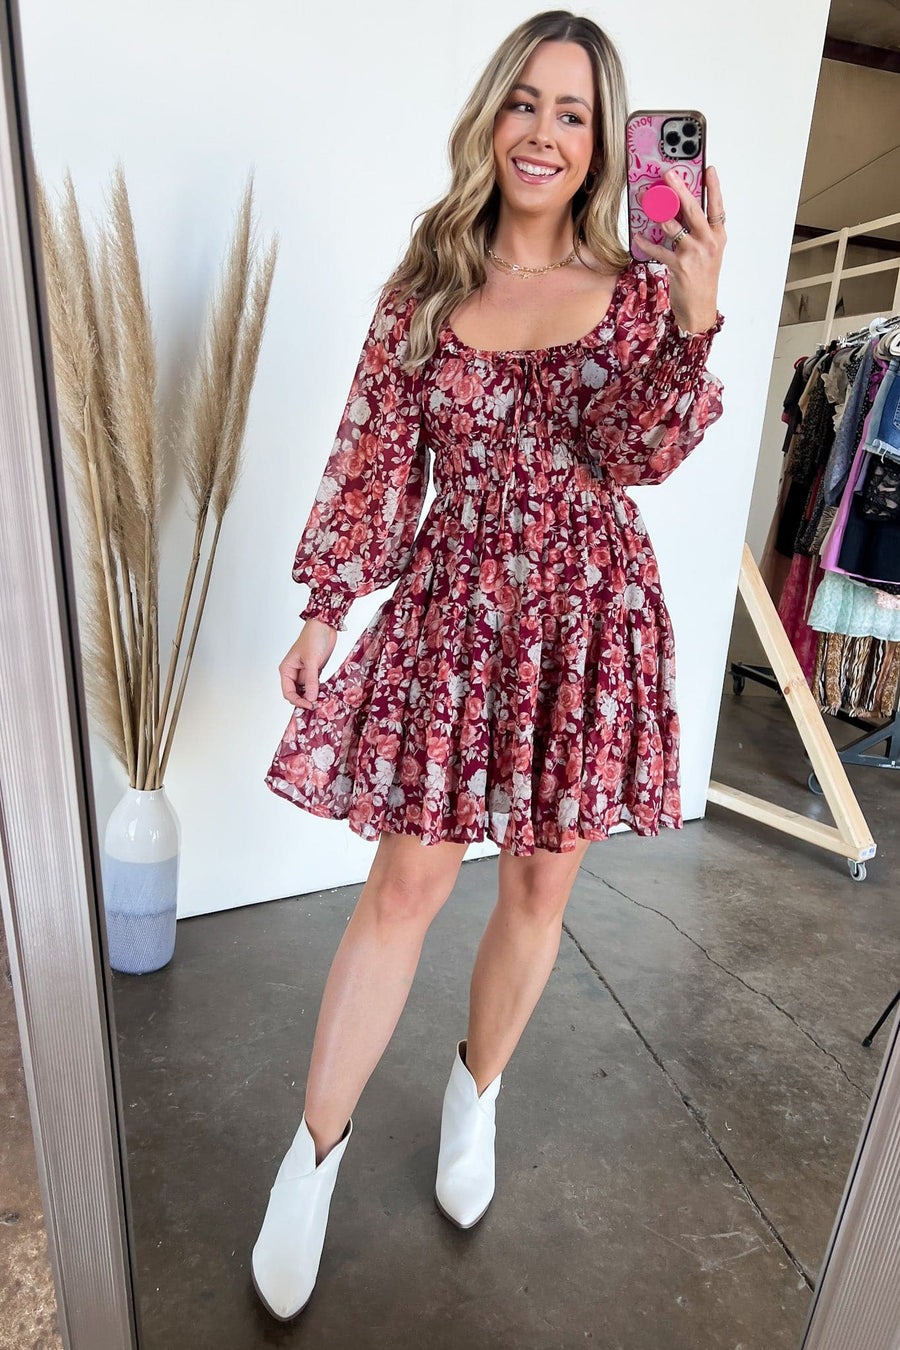  Grettina Floral Square Neck Dress - FINAL SALE - Madison and Mallory